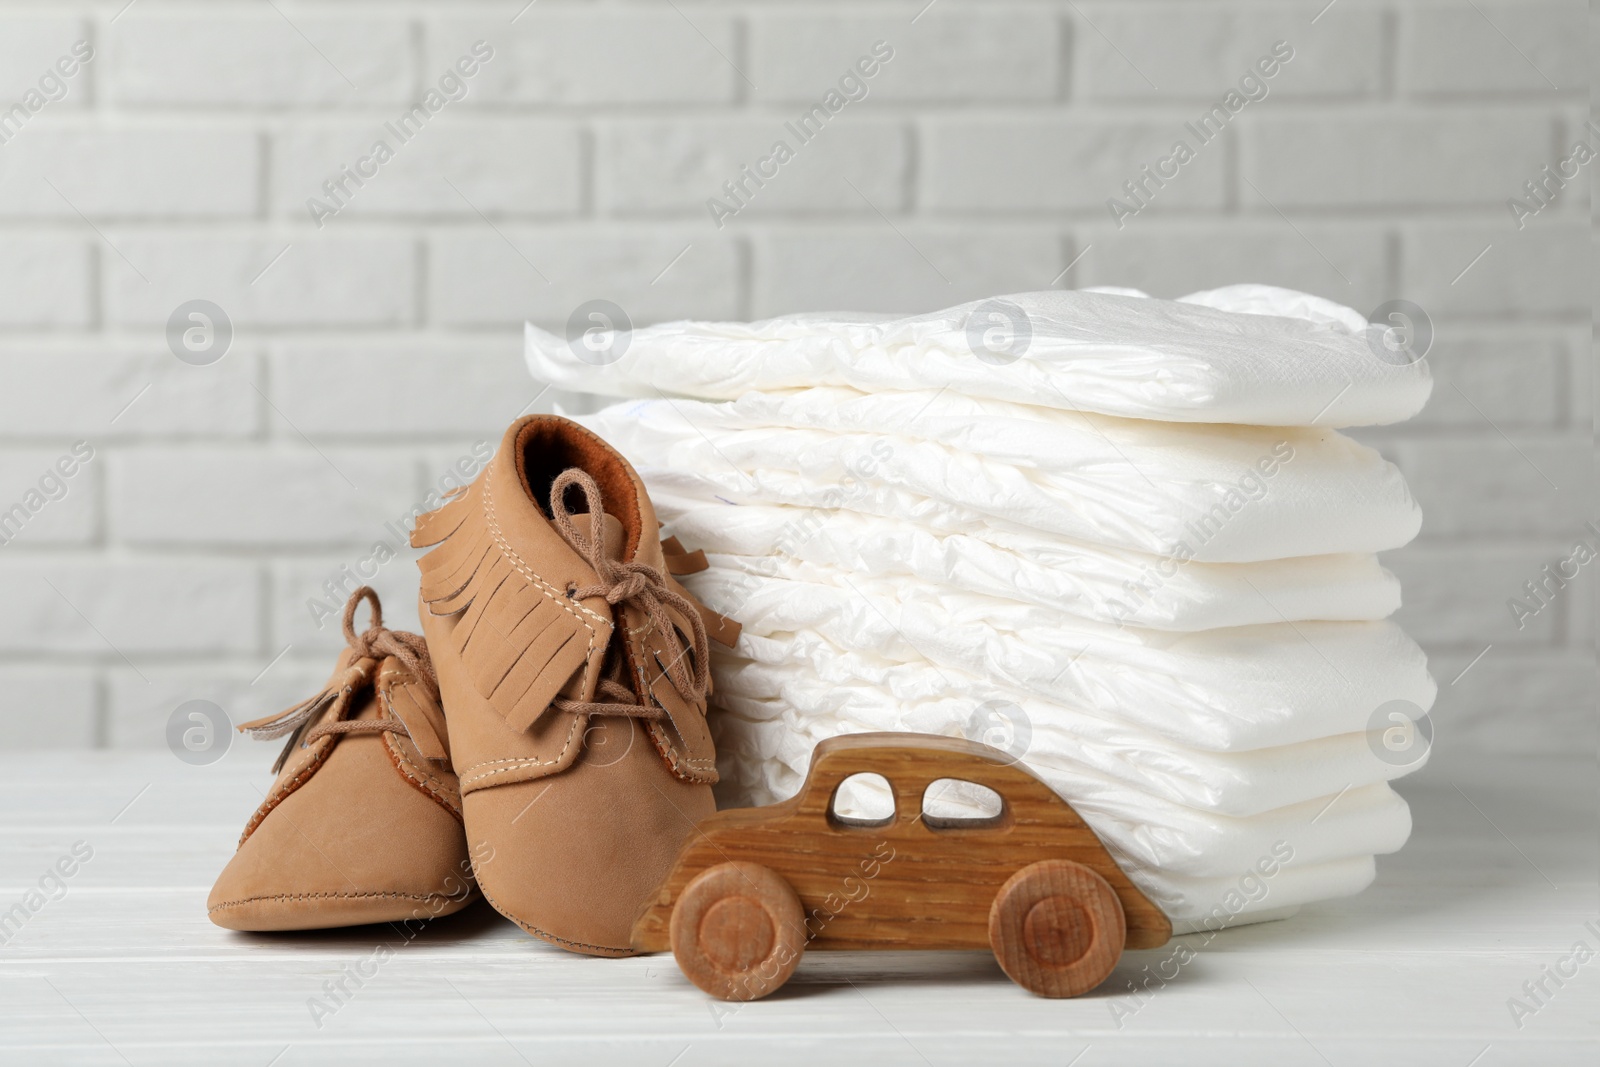 Photo of Baby diapers, toy car and child's shoes on wooden table against white brick wall